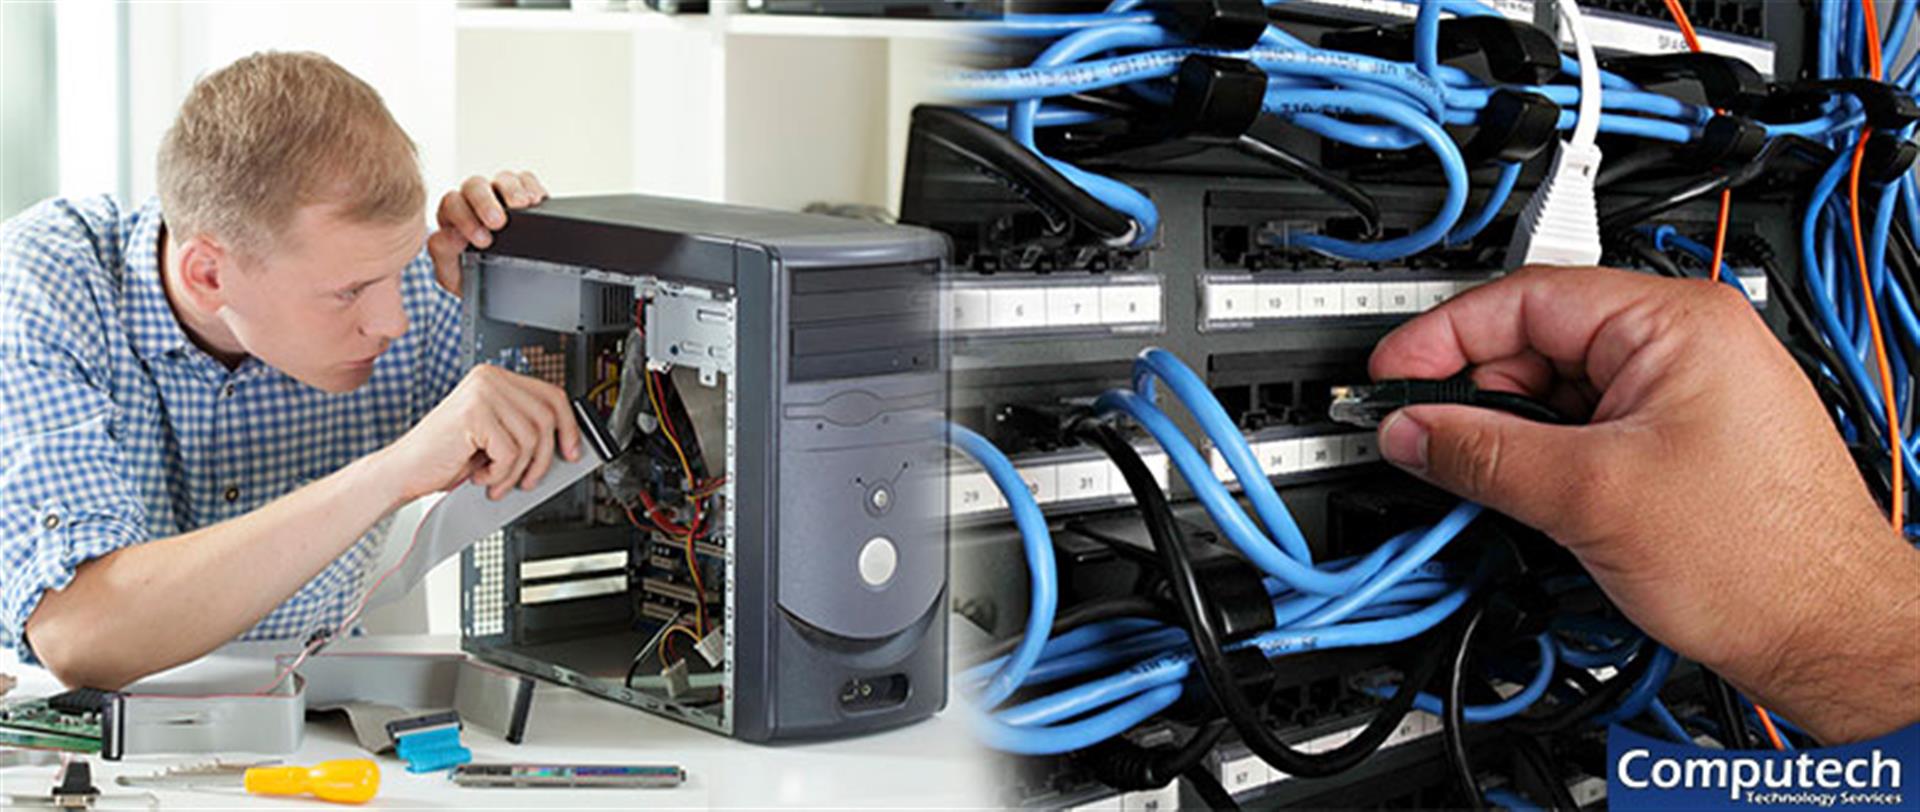 Braselton Georgia On-Site PC & Printer Repairs, Networks, Voice & Data Cabling Contractors